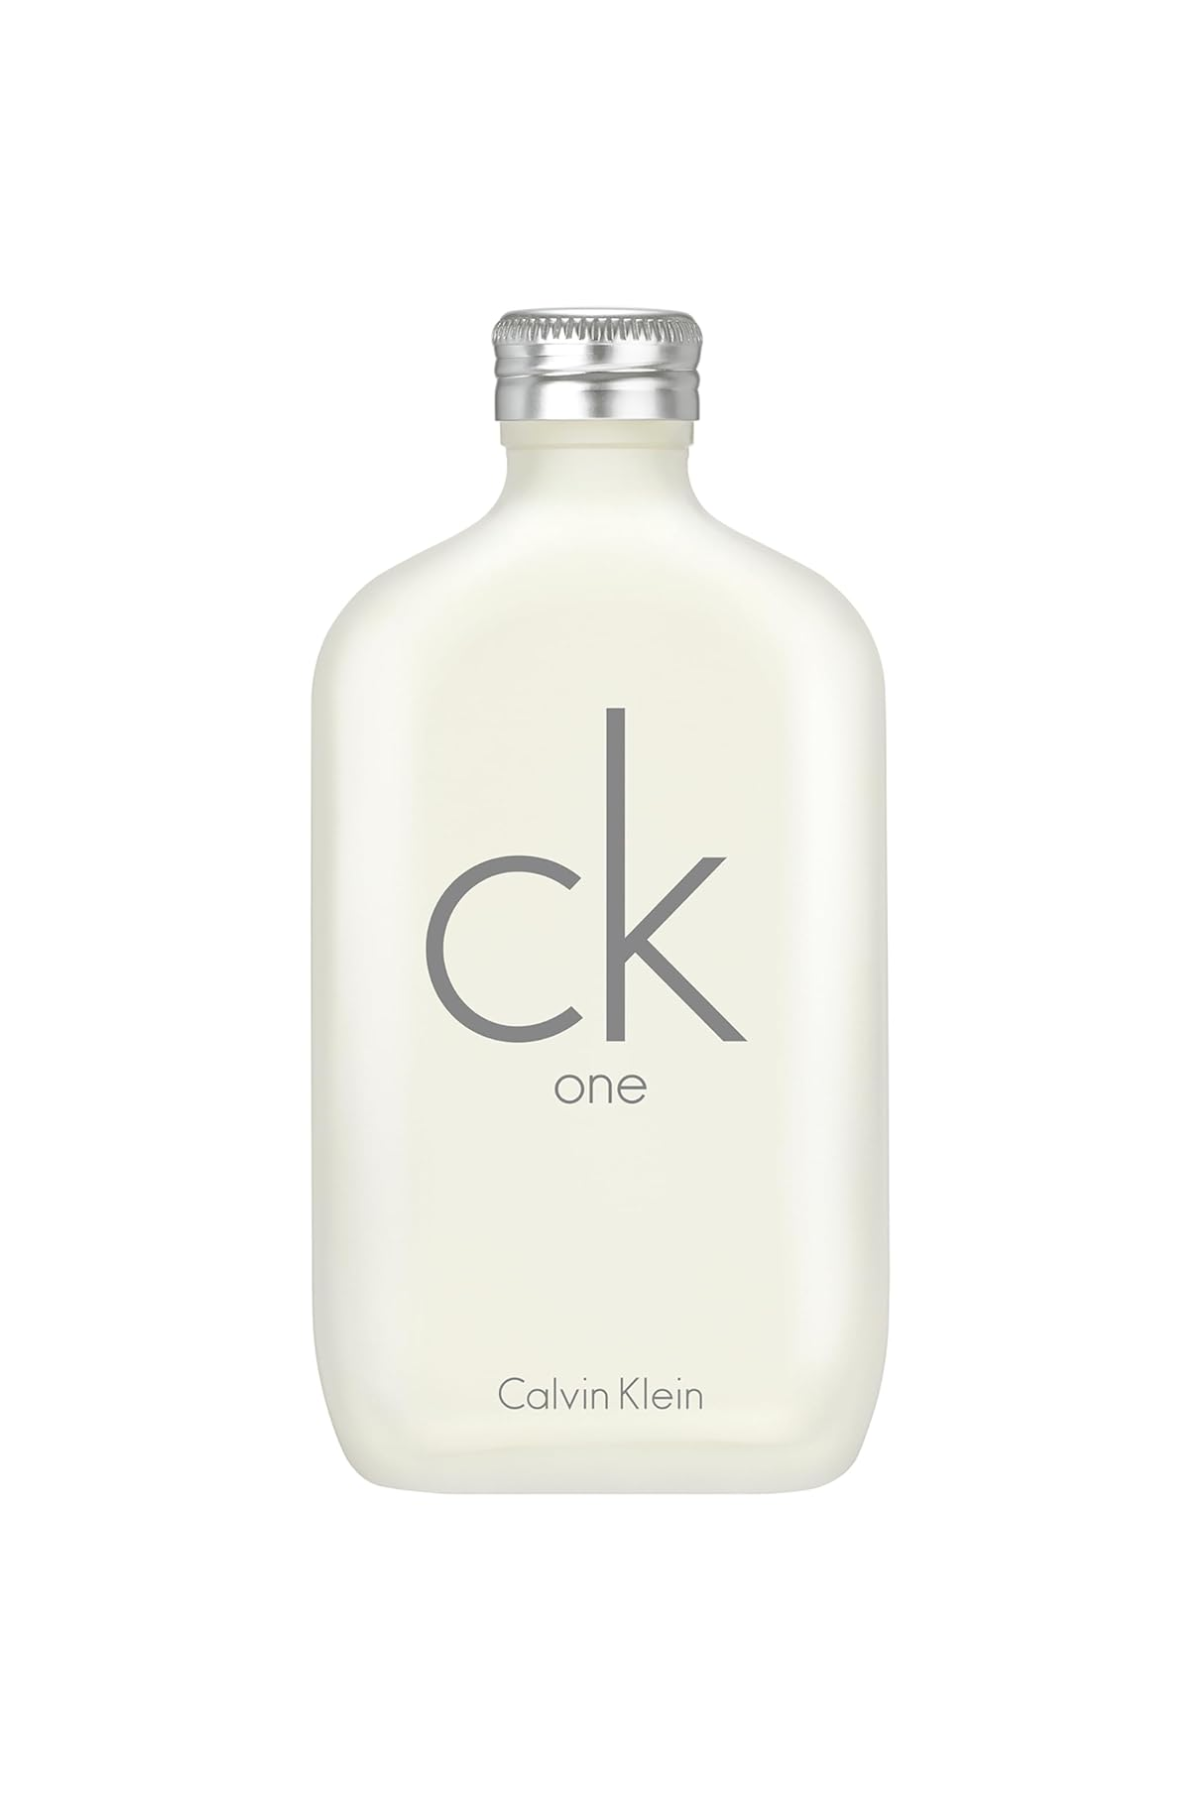 A bottle of CK One against a white background.